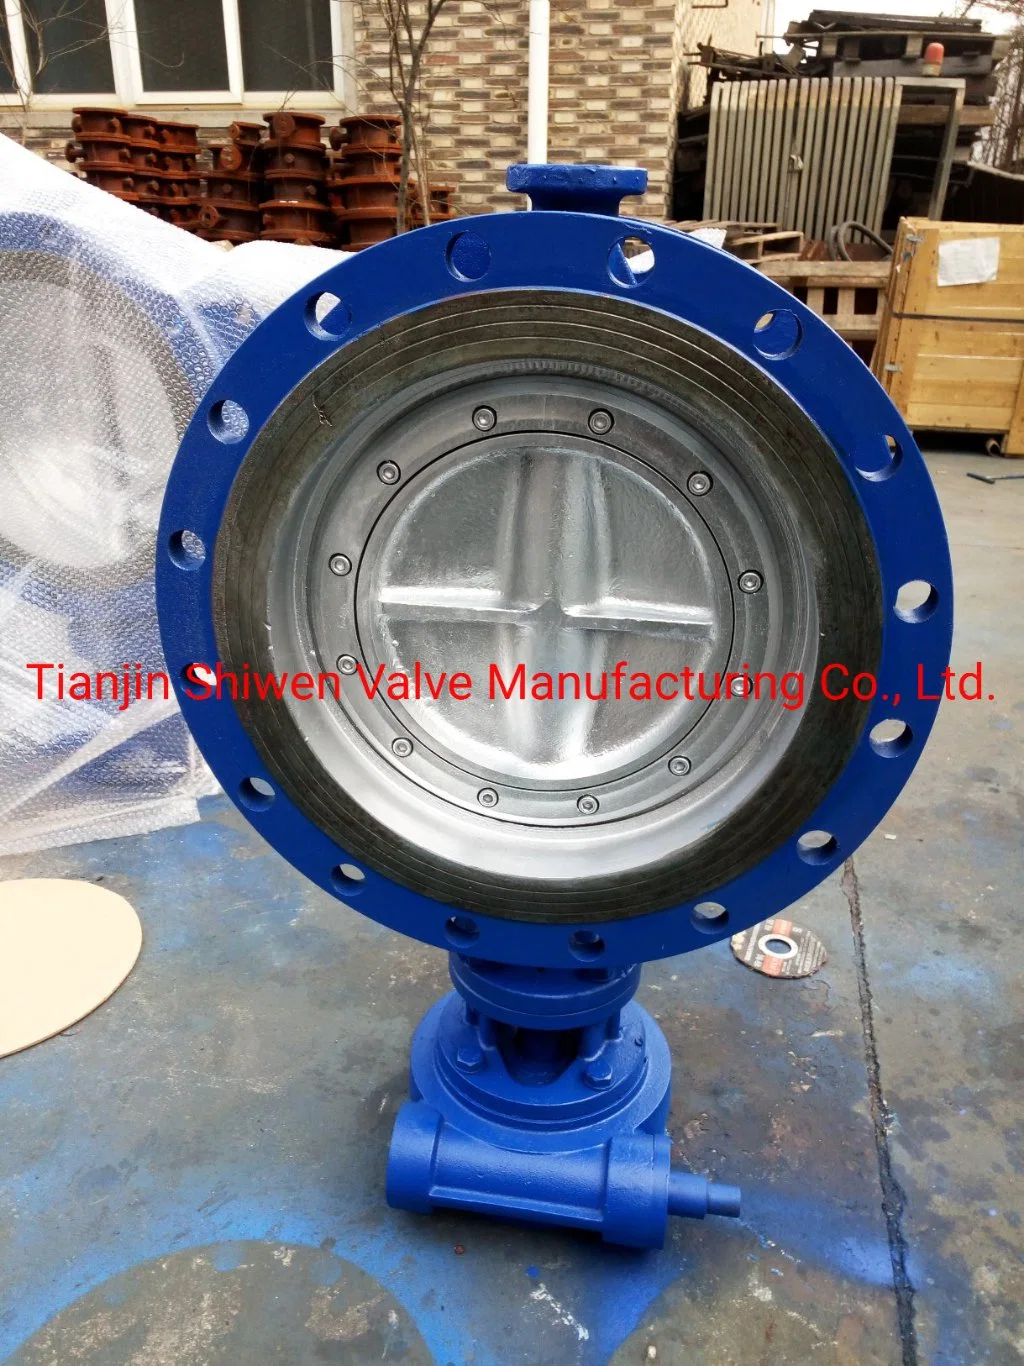 Triple Eccentric Metal Seat Flange Butterfly Valve with Gearbox Actuator